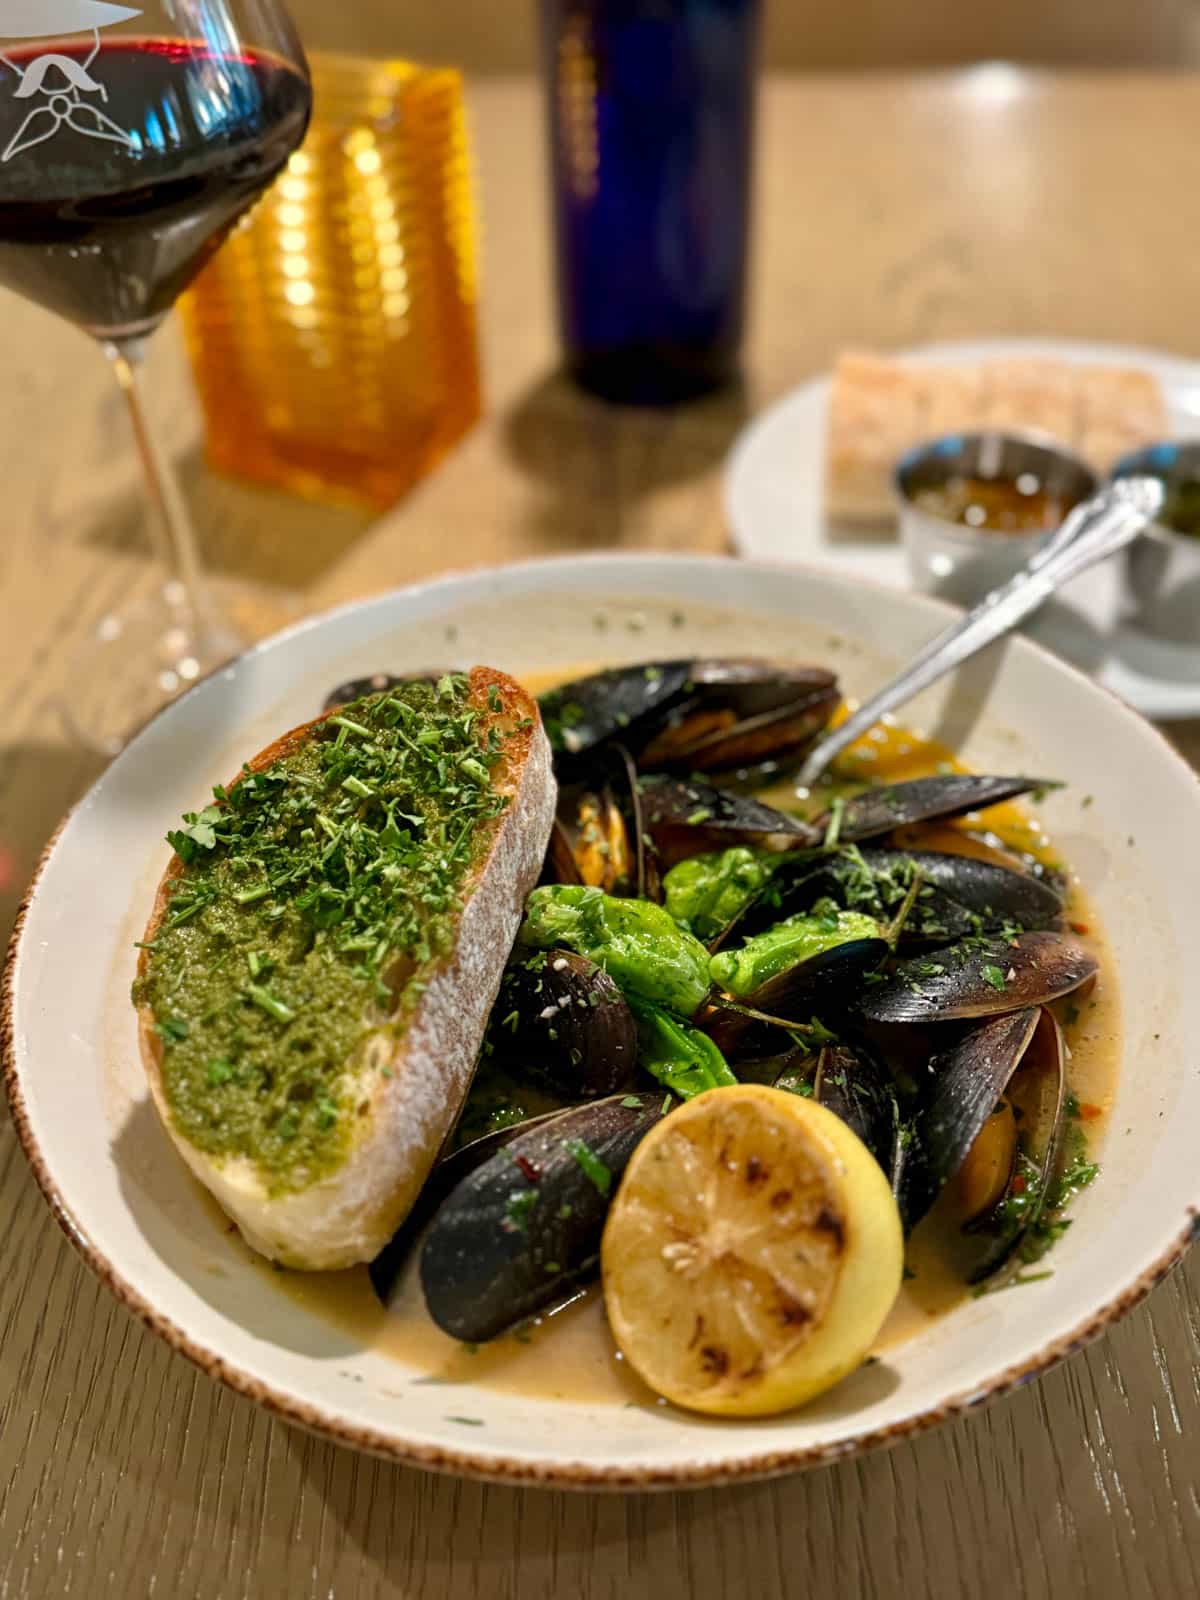 Mussels with bread and lemon half in a white bowl with glass of wine in background.